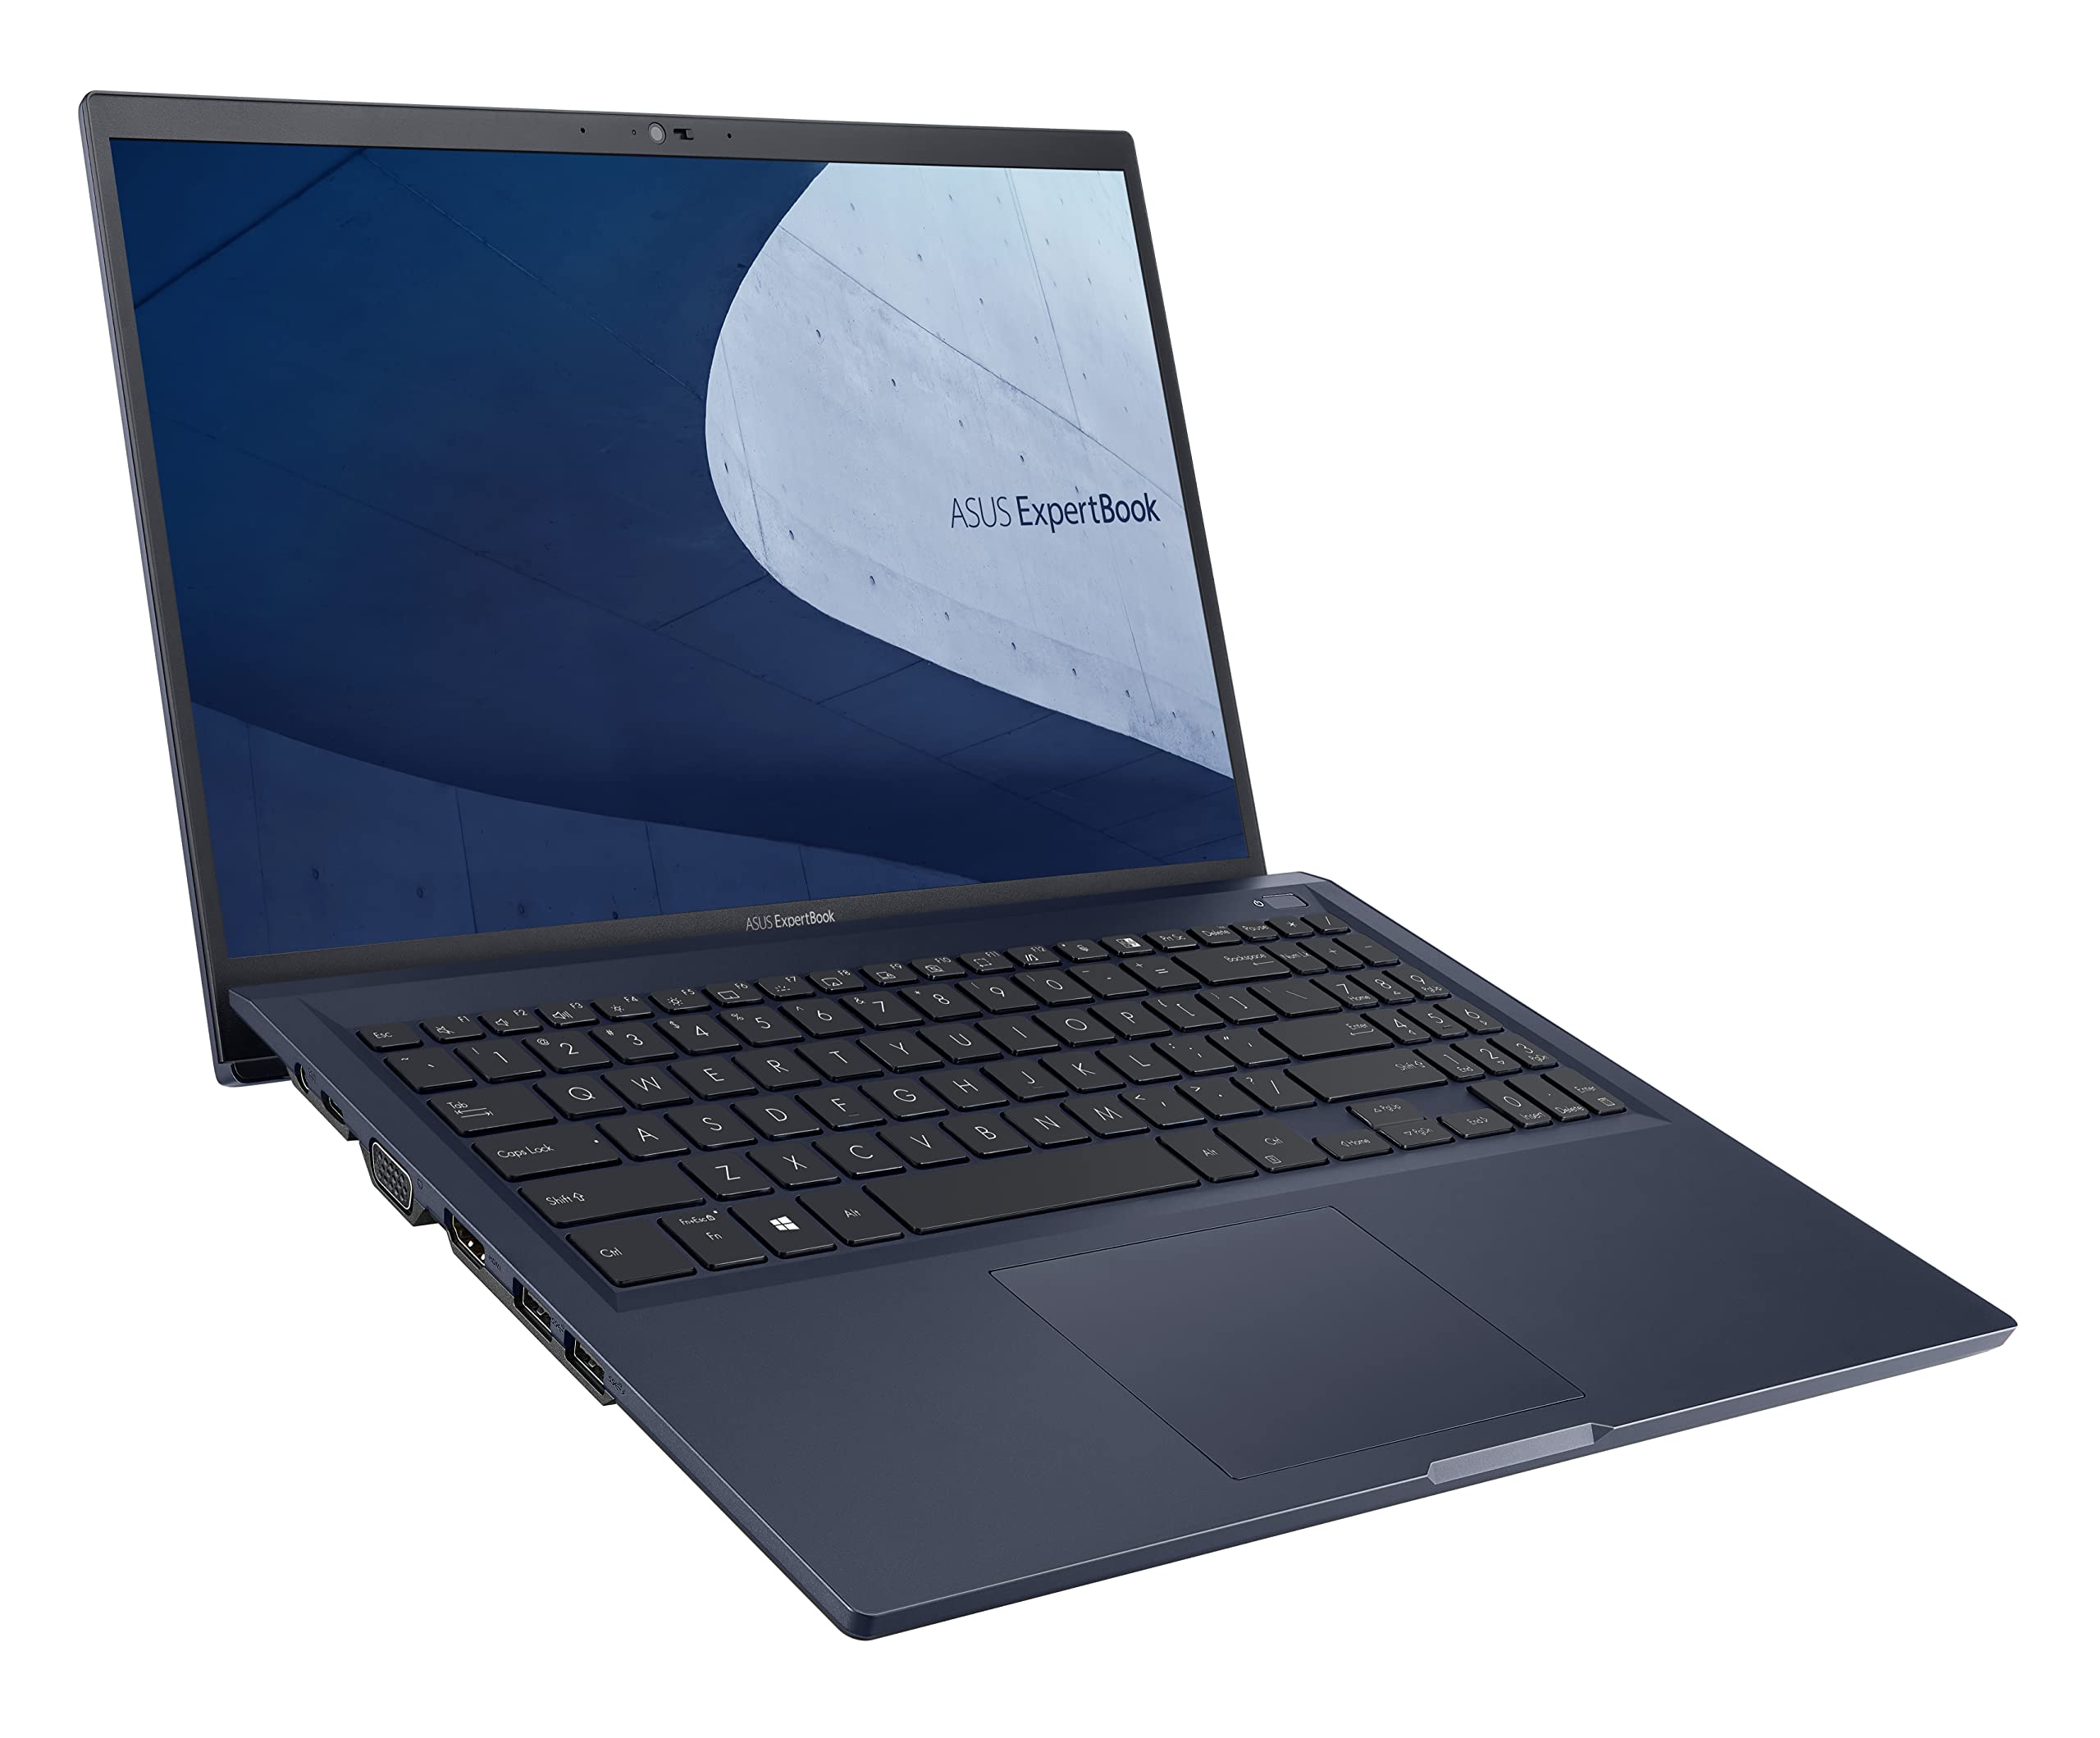 ASUS ExpertBook B1 Business Laptop, 14” FHD, Intel Core i5-1135G7, 256GB SSD, 8GB RAM, Military Grade Durable, AI Noise Cancelling, Webcam Privacy Shield, Win 10 Pro, Star Black, B1400CEA-XH51